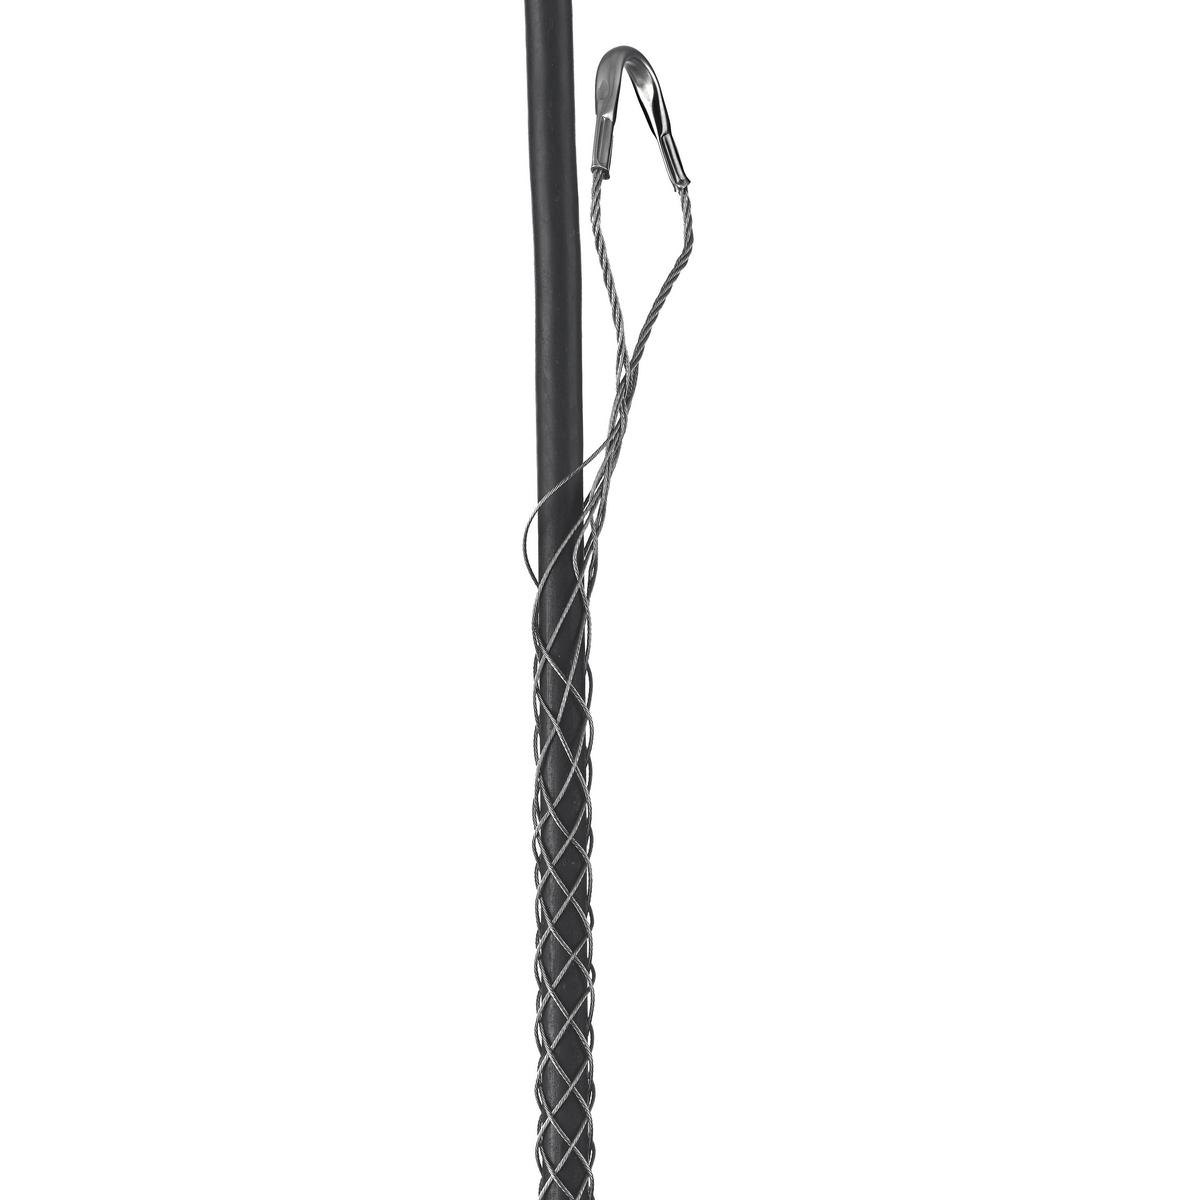 Hubbell 02401044 Support Grips, Offset Eye, Single Weave, Closed Mesh, Stainless Steel, 1.75-1.99"  ; Offset eye ; Strand equalizers position wires for equal loading throughout grip length ; Eye assemblies provide eye reinforcement at support hardware ; Closed Mesh